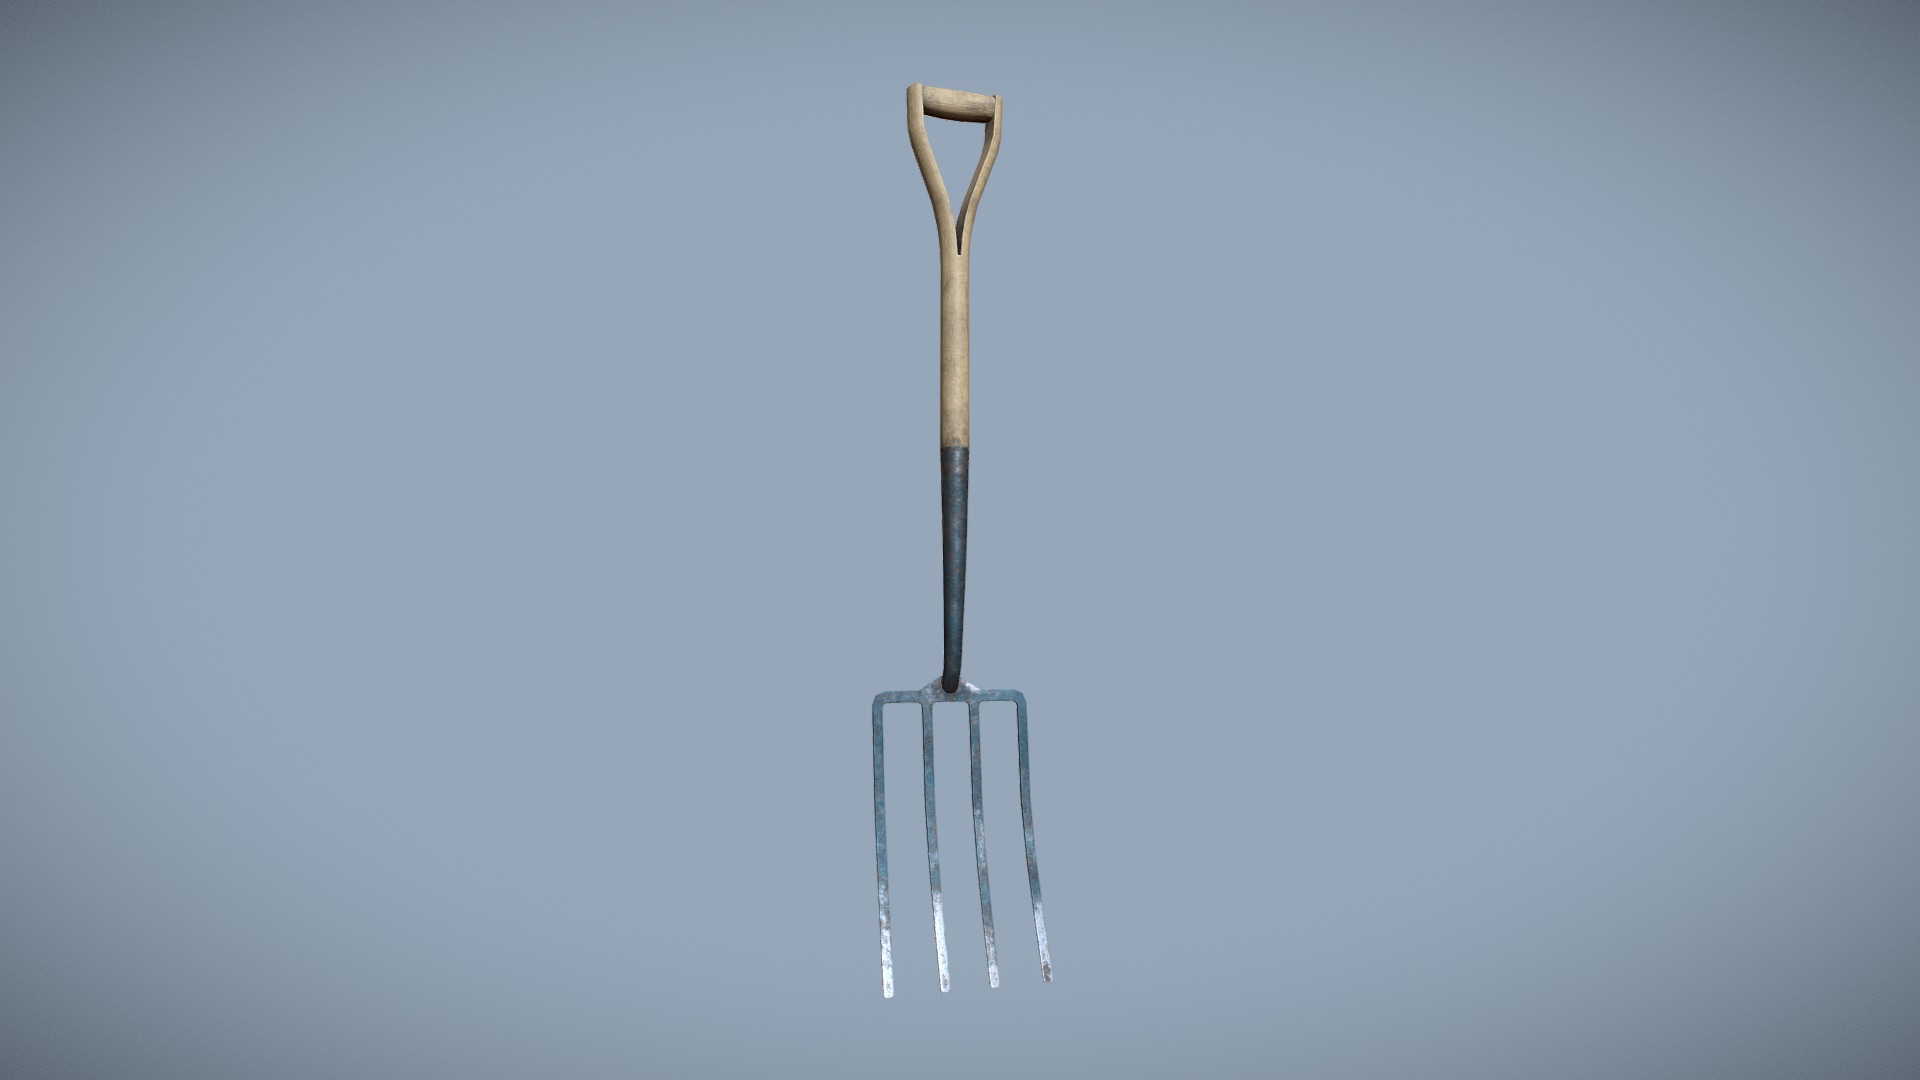 3D model Low poly garden fork - This is a 3D model of the Low poly garden fork. The 3D model is about a tall antenna on a pole.